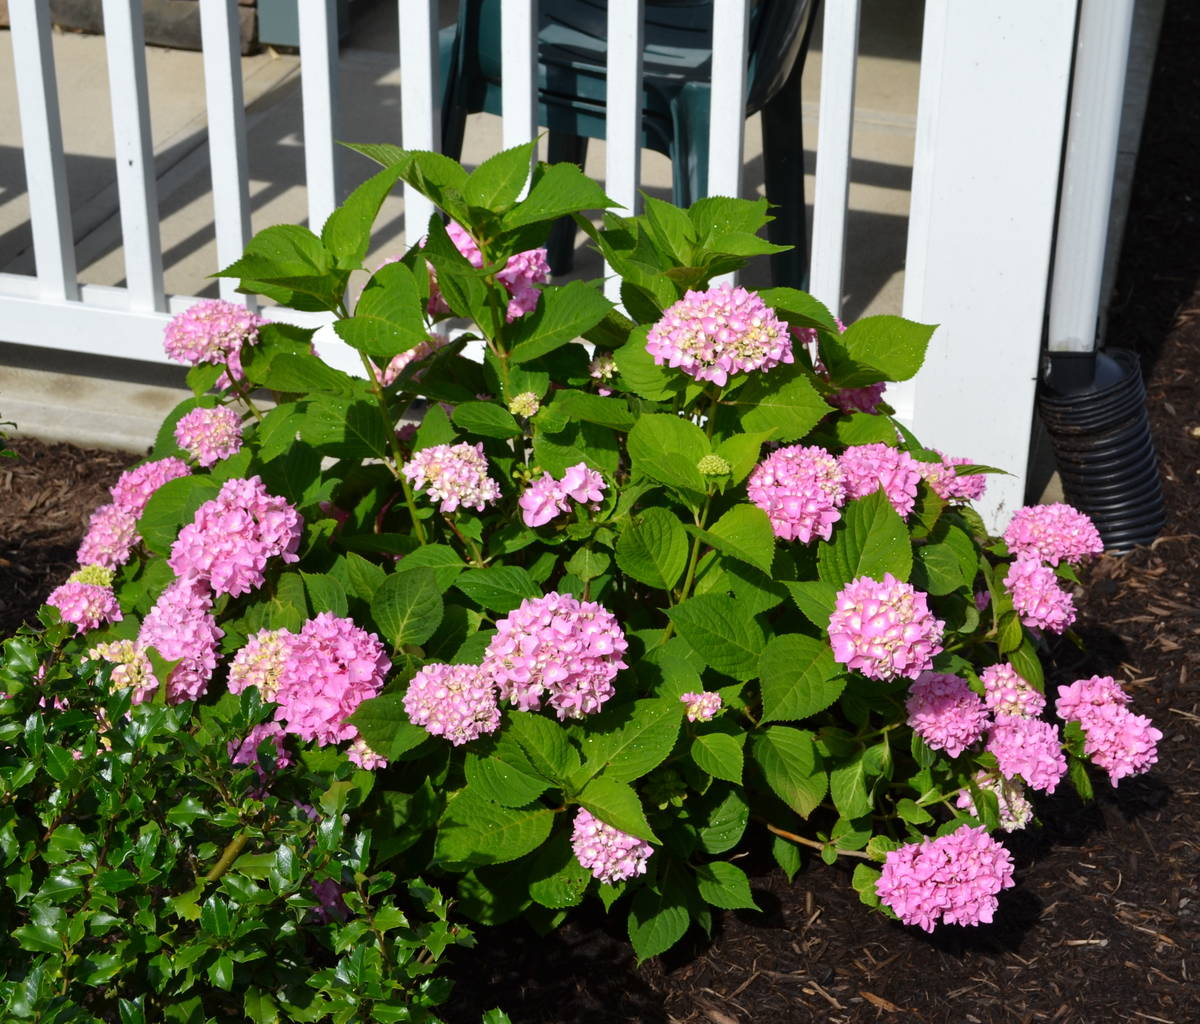 Hydrangea Endless Summer planted in front of a porch.